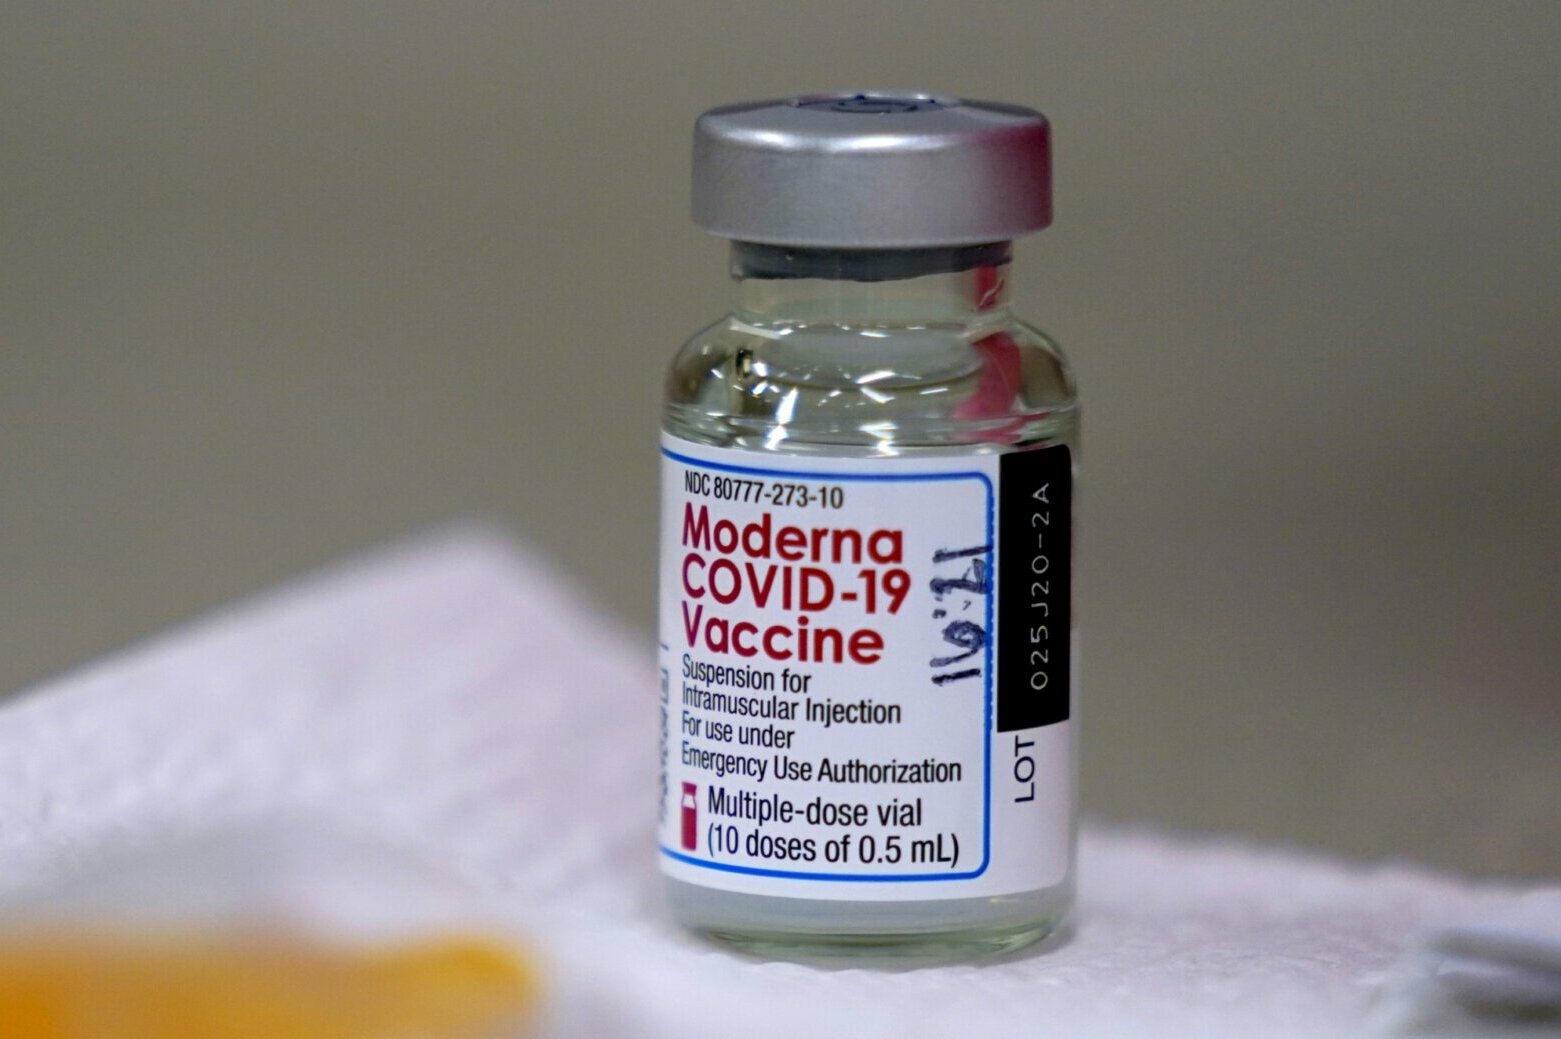 The next phases of the launch of the COVID-19 vaccine were halted at Montgomery Co. due to low supply